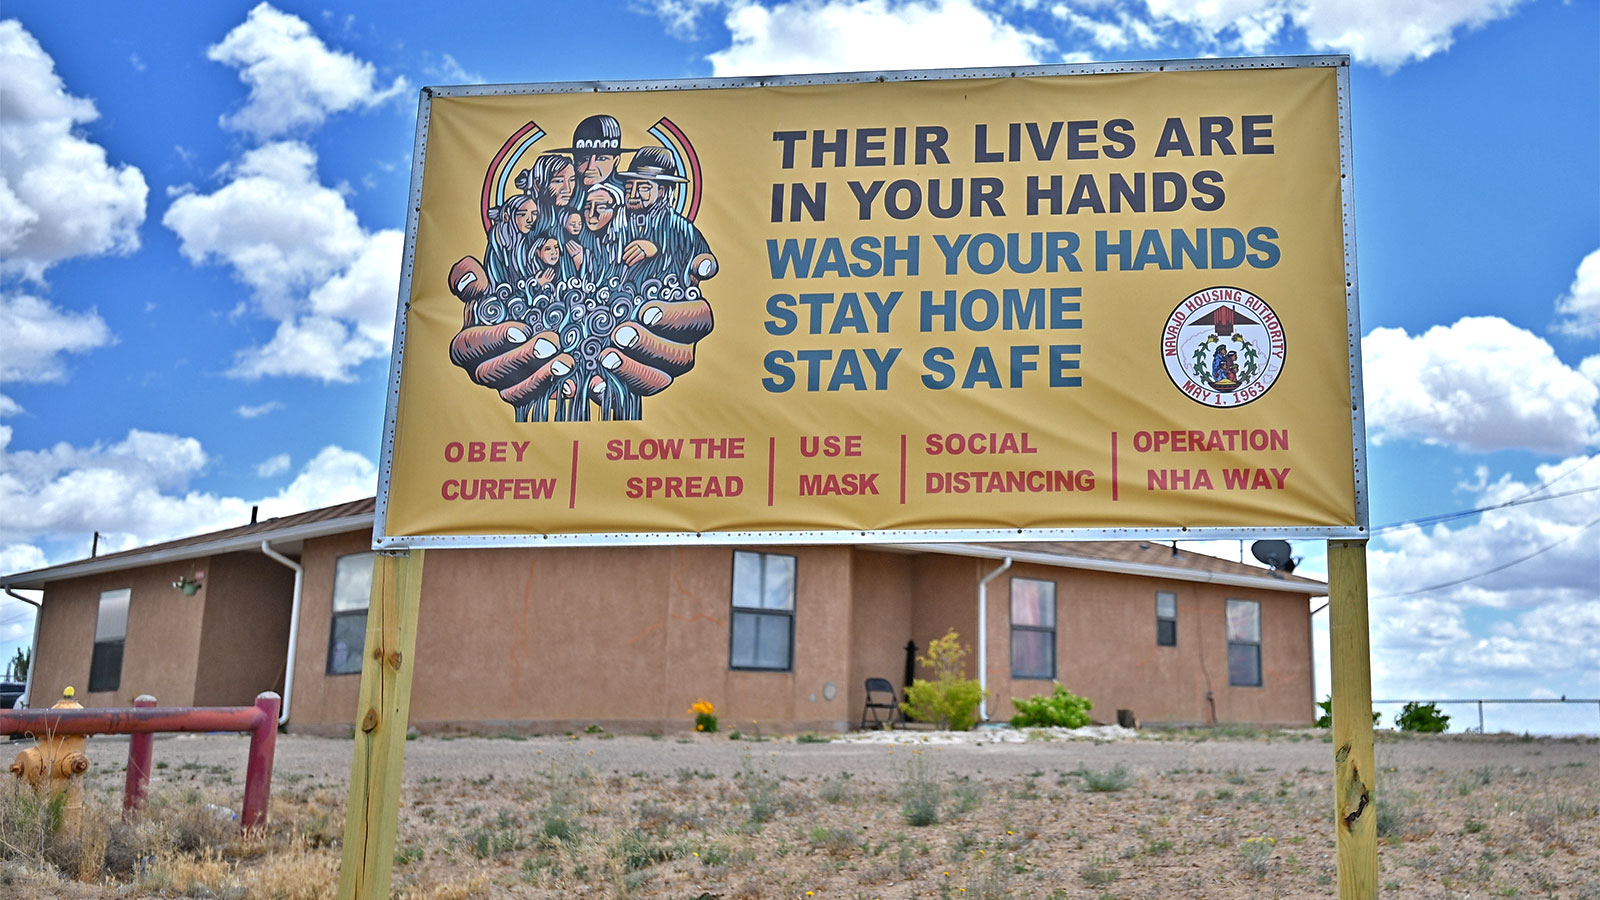 A sign displays a message about staying safe from the coronavirus at an entrance to a Navajo Nation housing community.